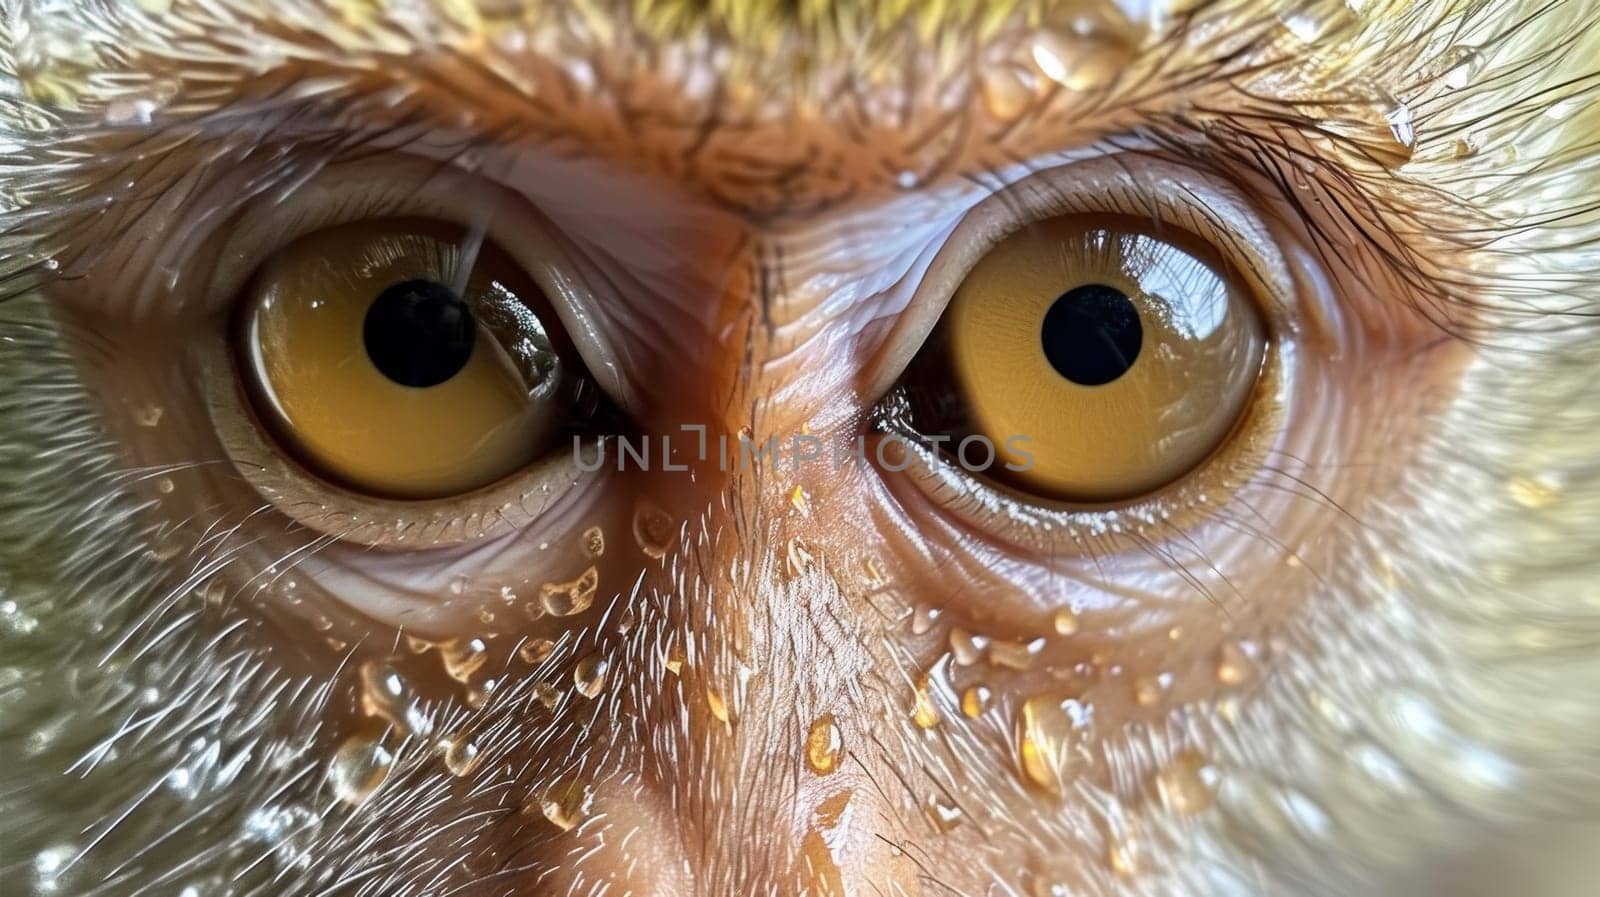 A close up of a monkey's face with water droplets on it